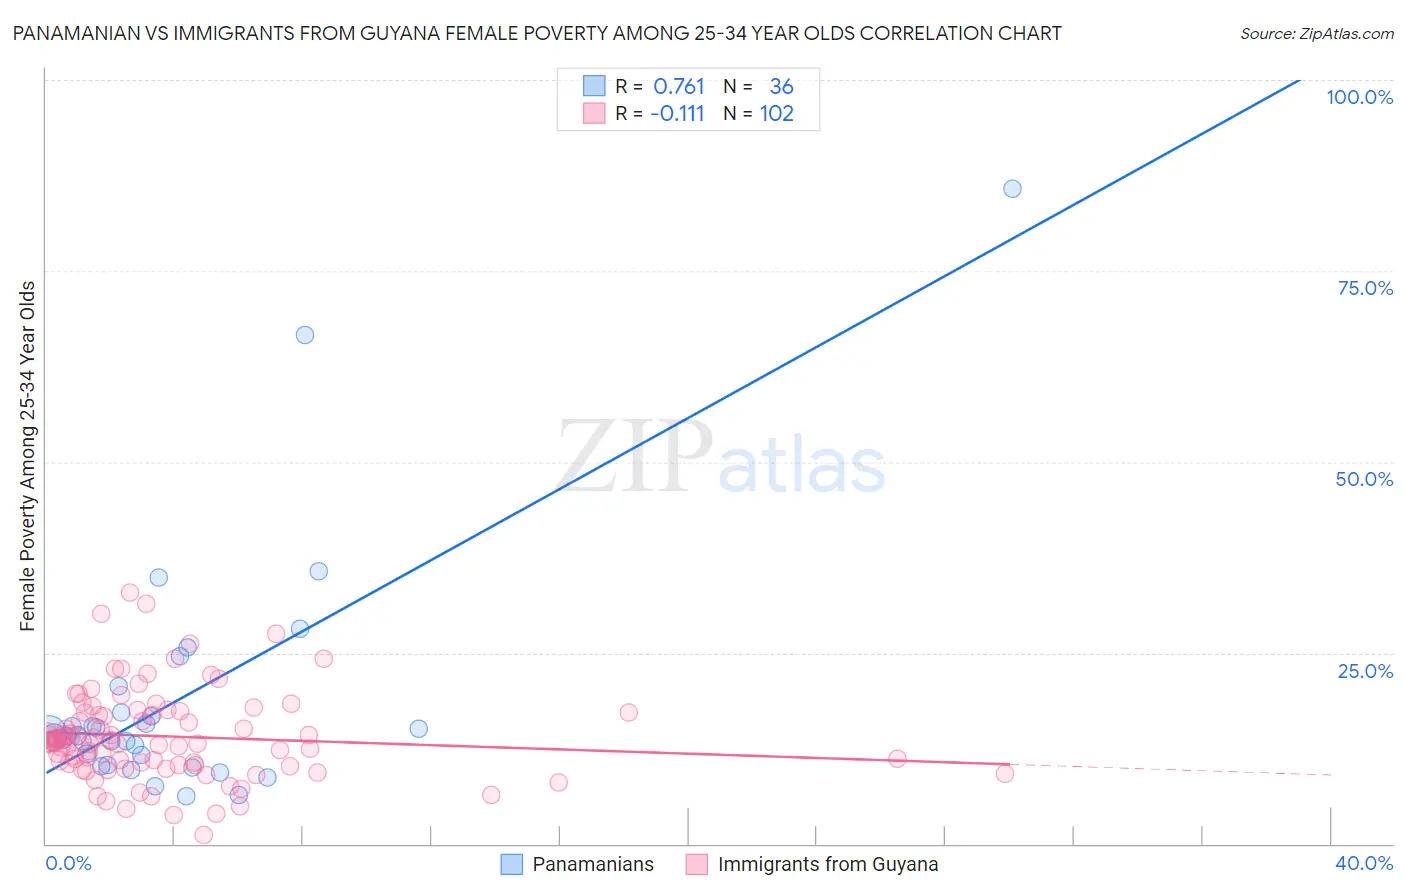 Panamanian vs Immigrants from Guyana Female Poverty Among 25-34 Year Olds